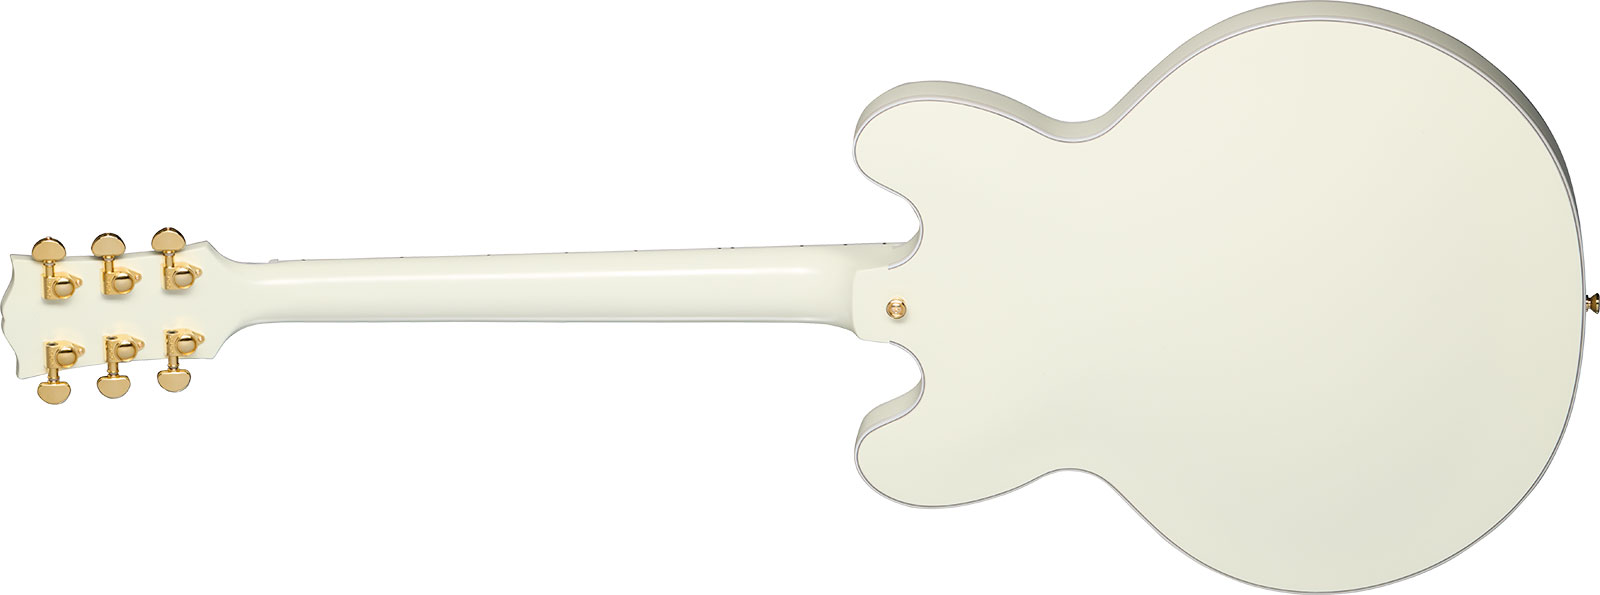 Epiphone Es355 1959 Inspired By 2h Gibson Ht Eb - Vos Classic White - Semi hollow elektriche gitaar - Variation 1